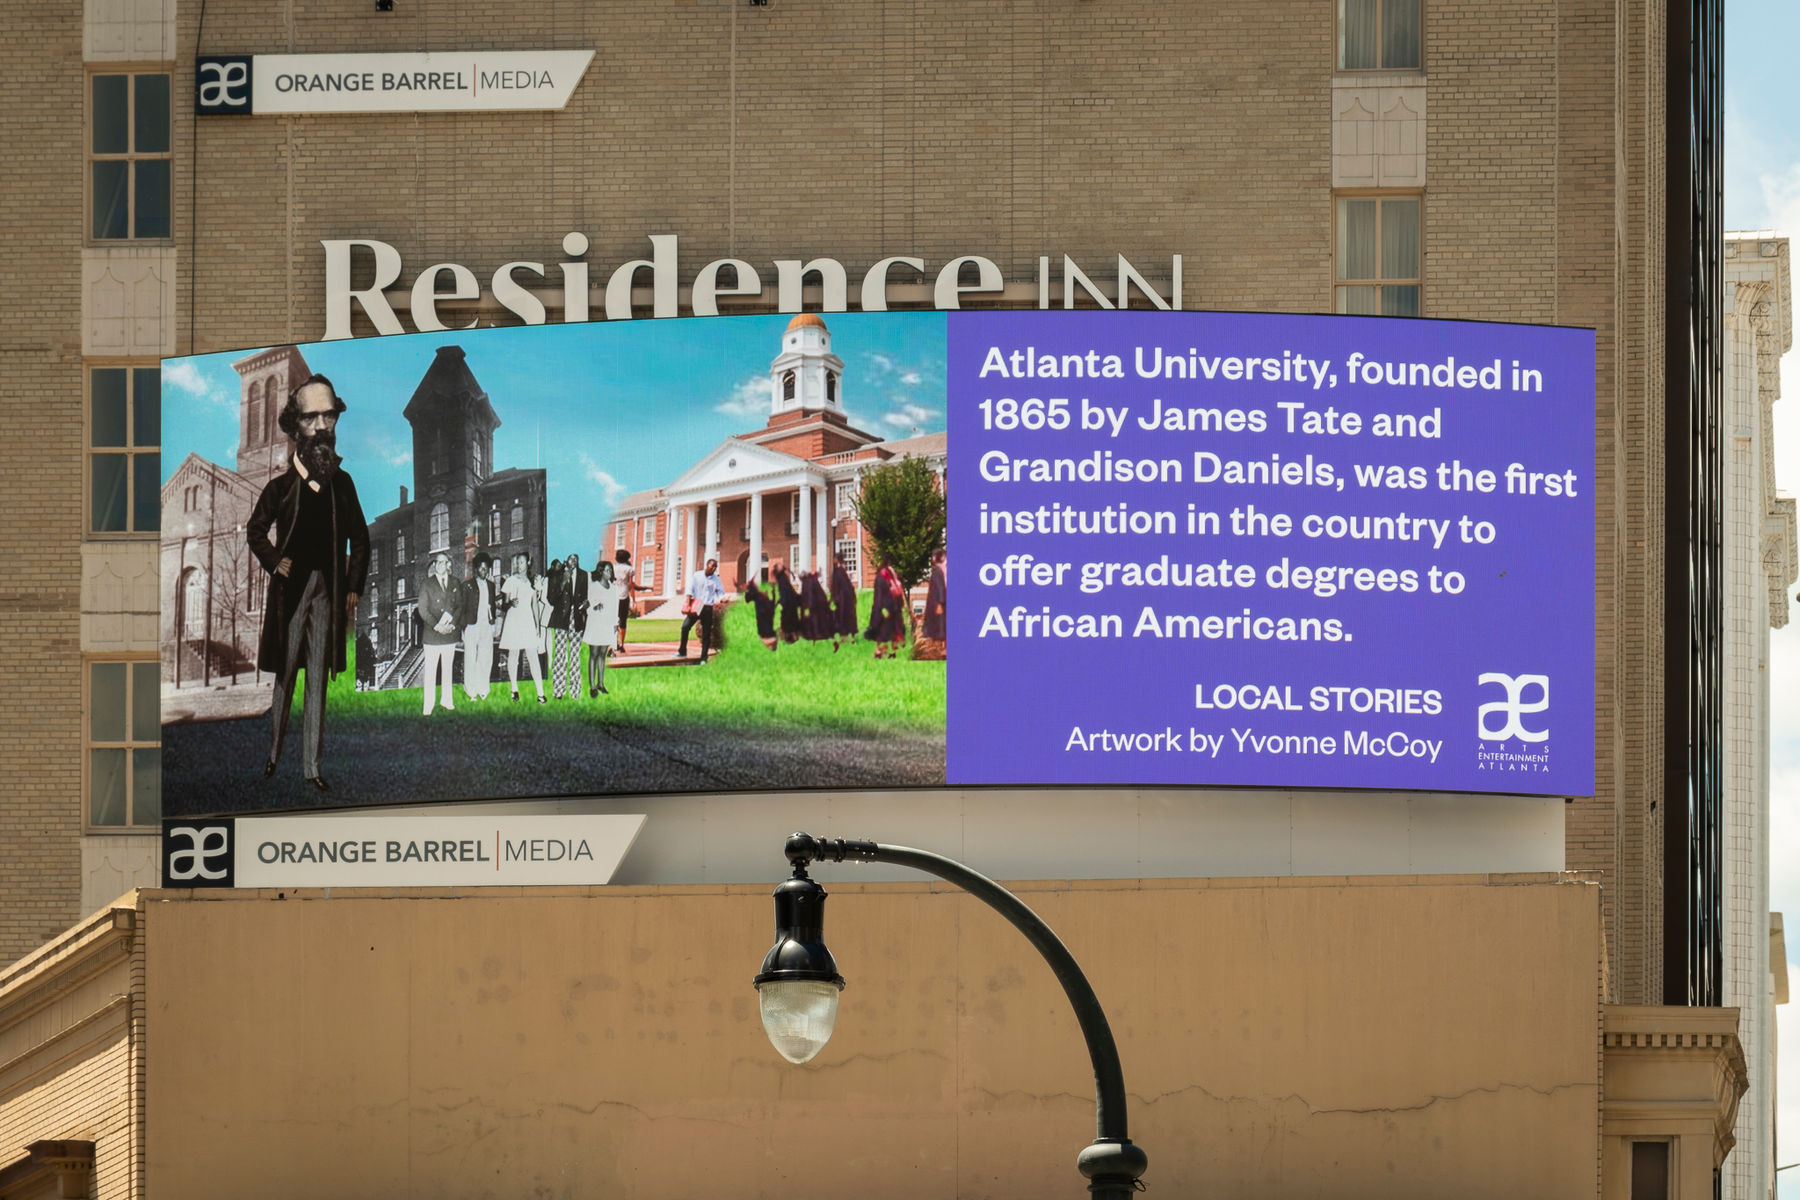 Atlanta HBCUs: A Center of Black Higher Education in the Deep South